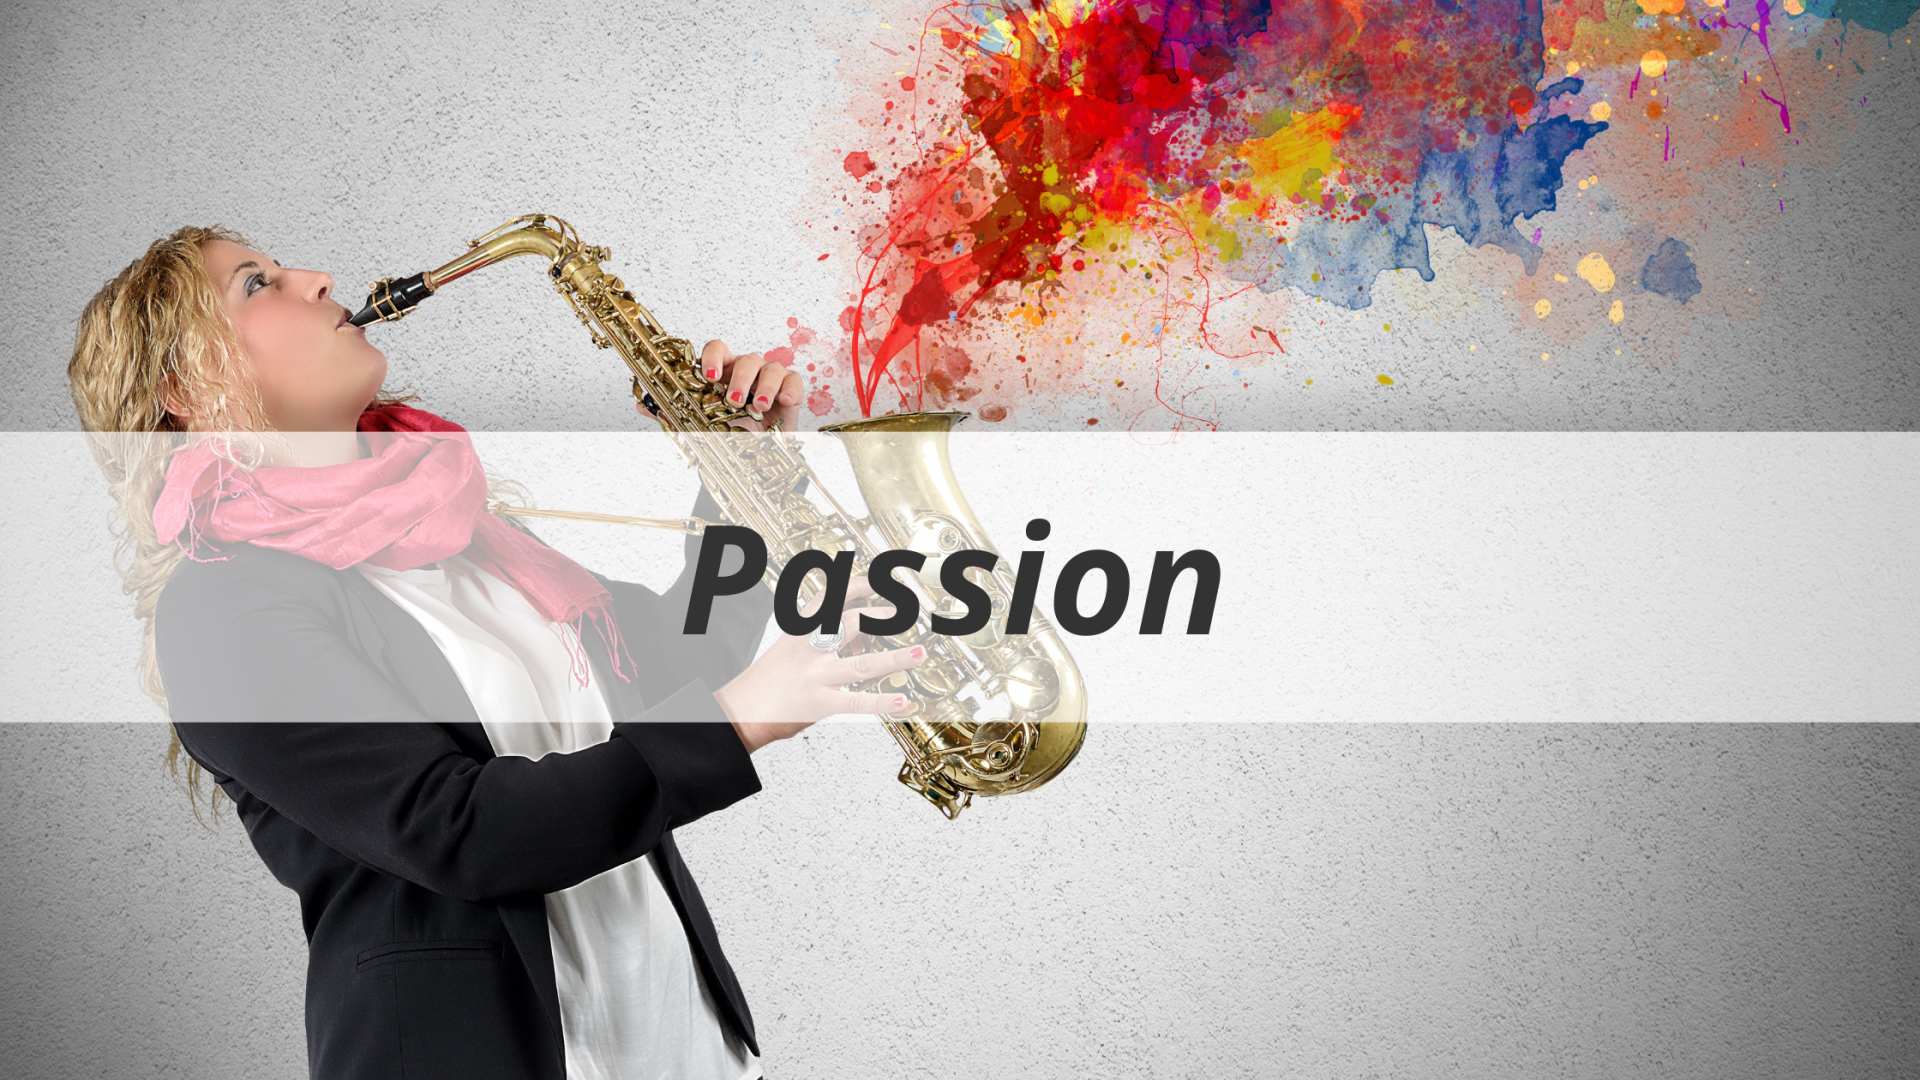 To be a successful freelancer, you must have passion.